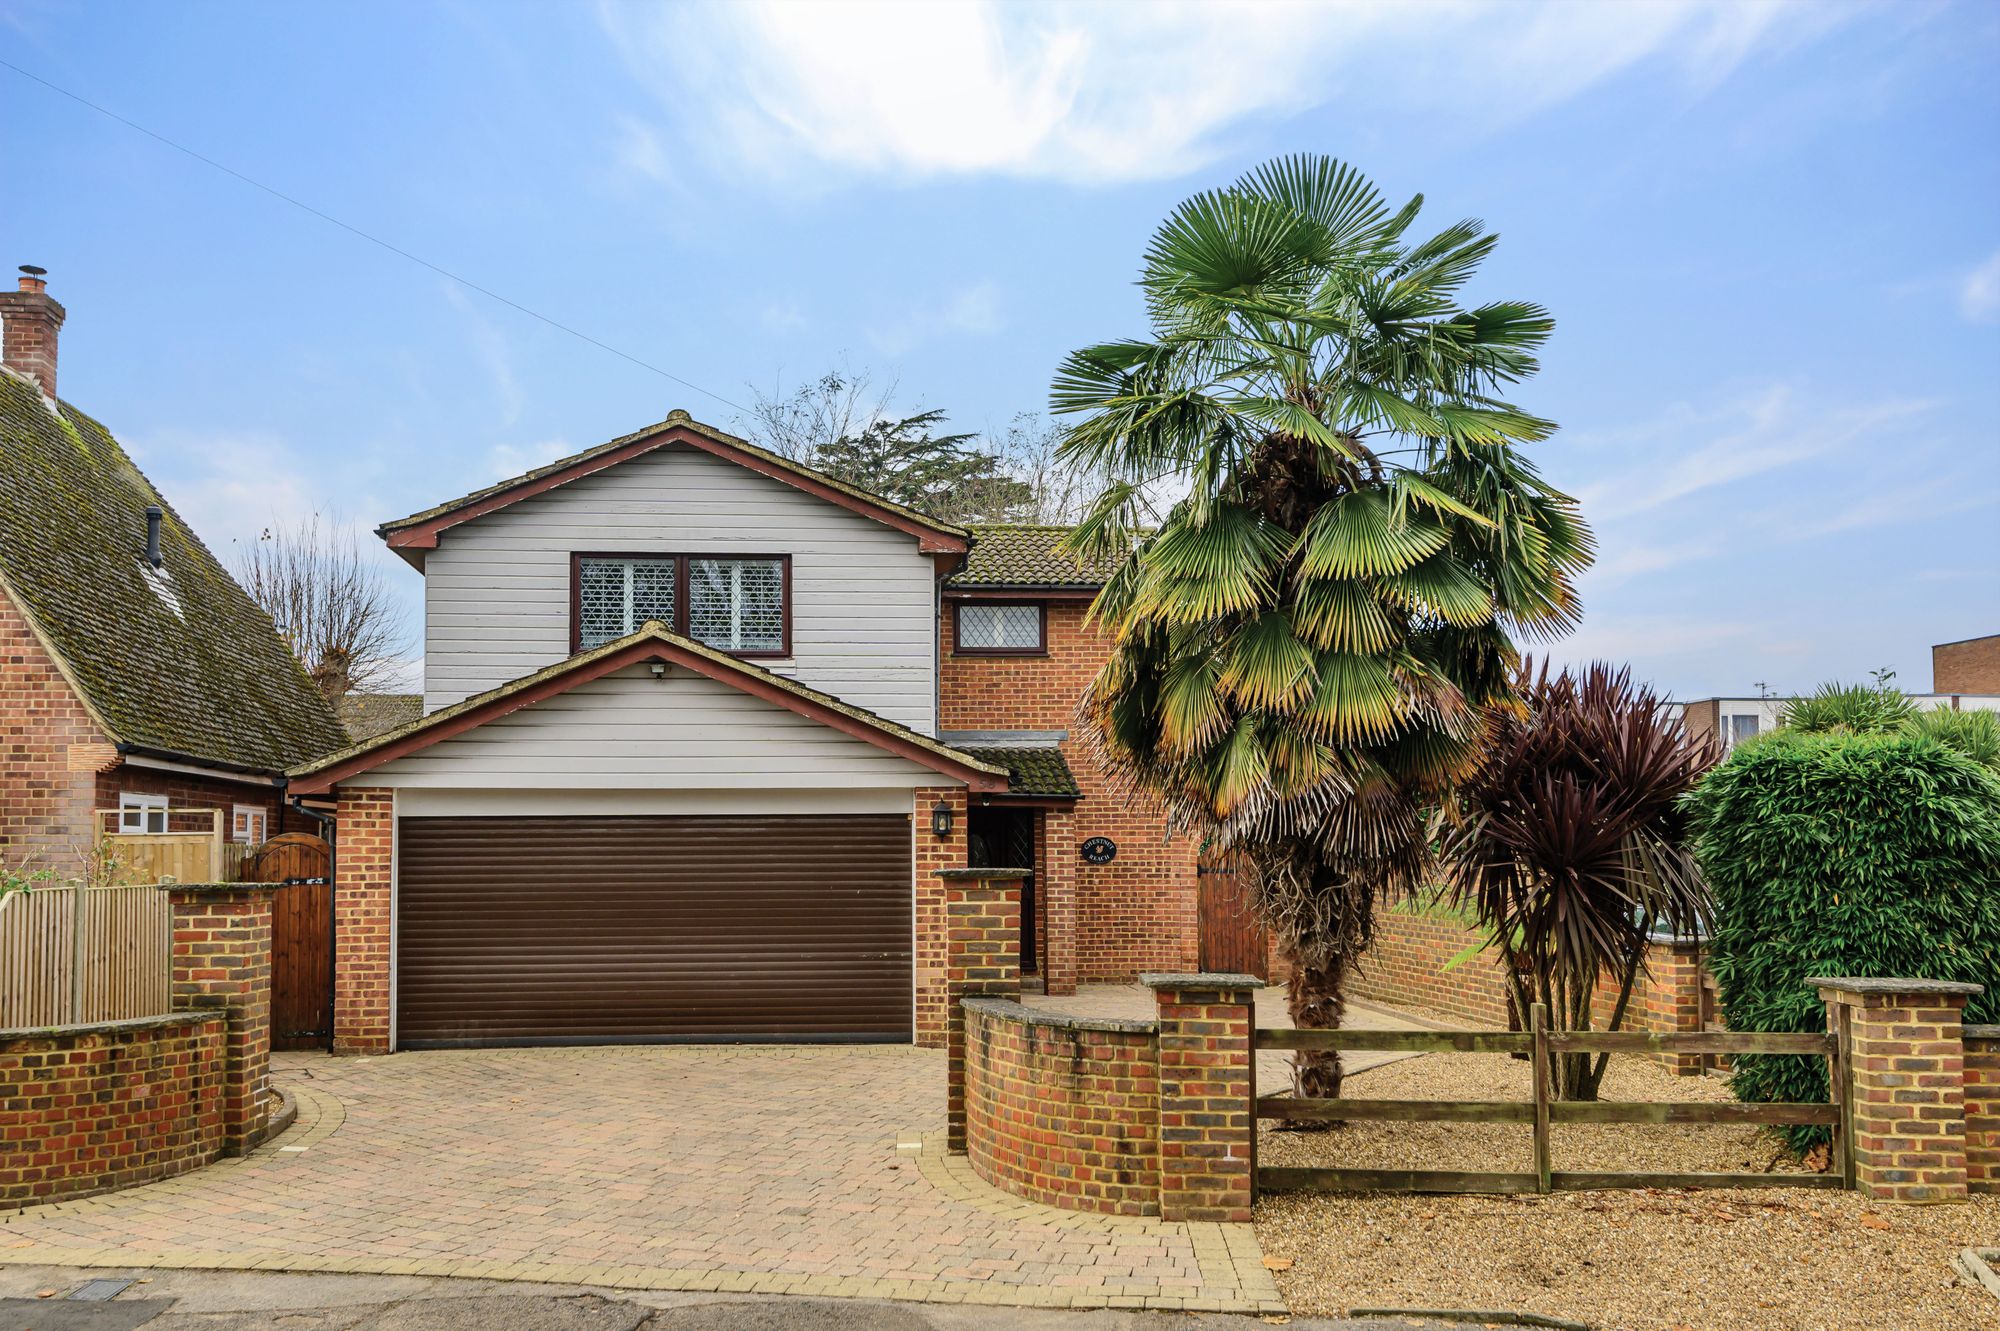 4 bed detached house for sale in Penton Road, Staines-Upon-Thames  - Property Image 1